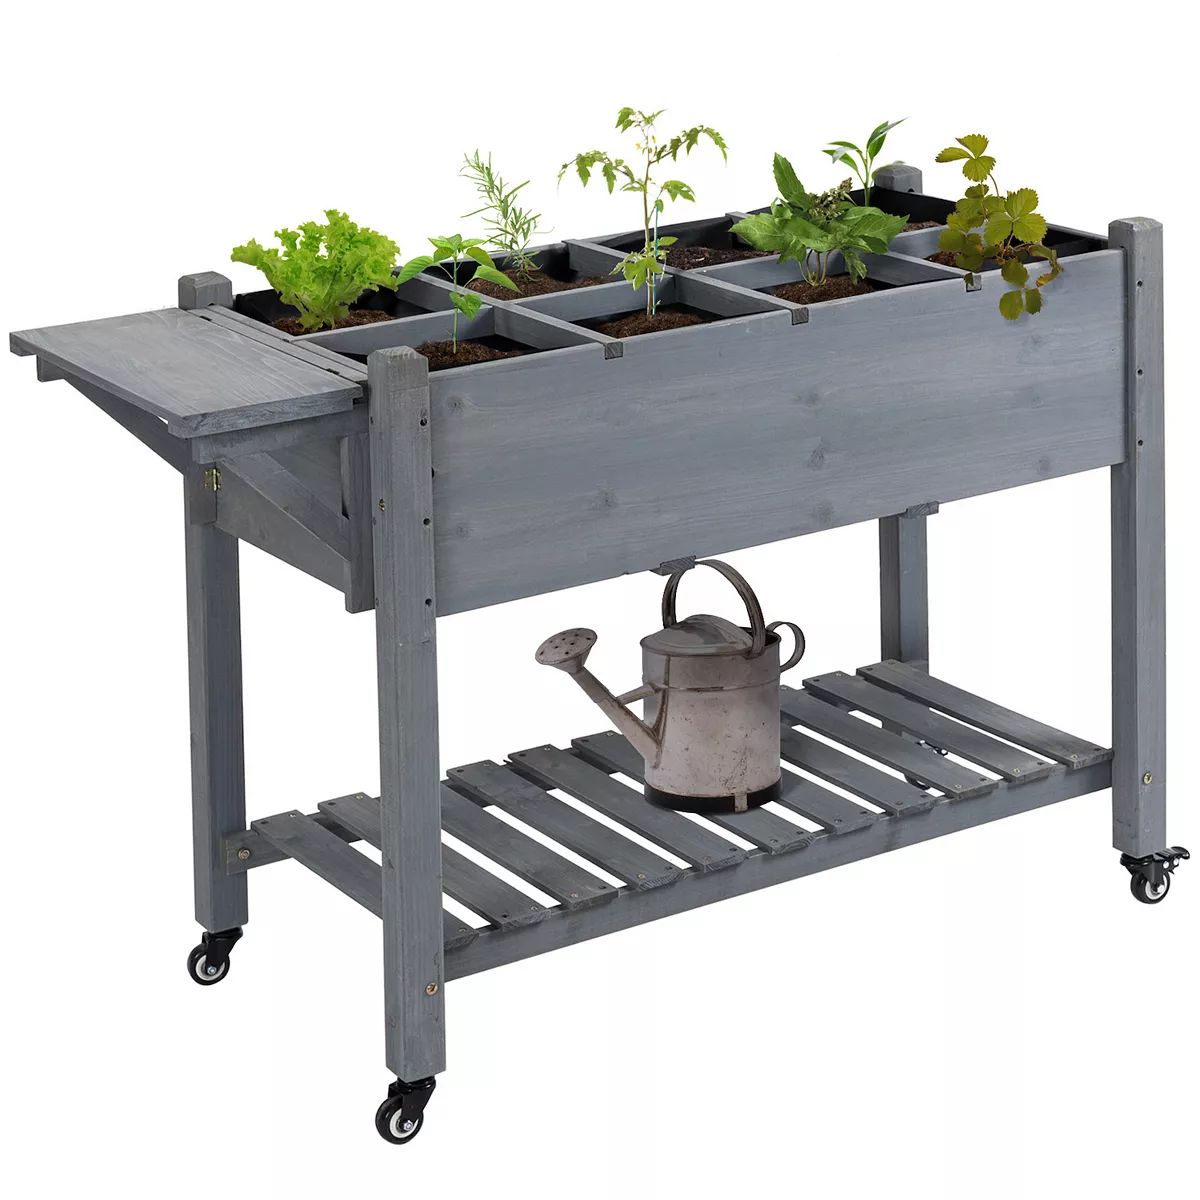 Outsunny 49" x 21" x 34" Raised Garden Bed w/ 8 Grow Grids, Outdoor Wood Plant Box Stand w/ Foldi... | Kohl's